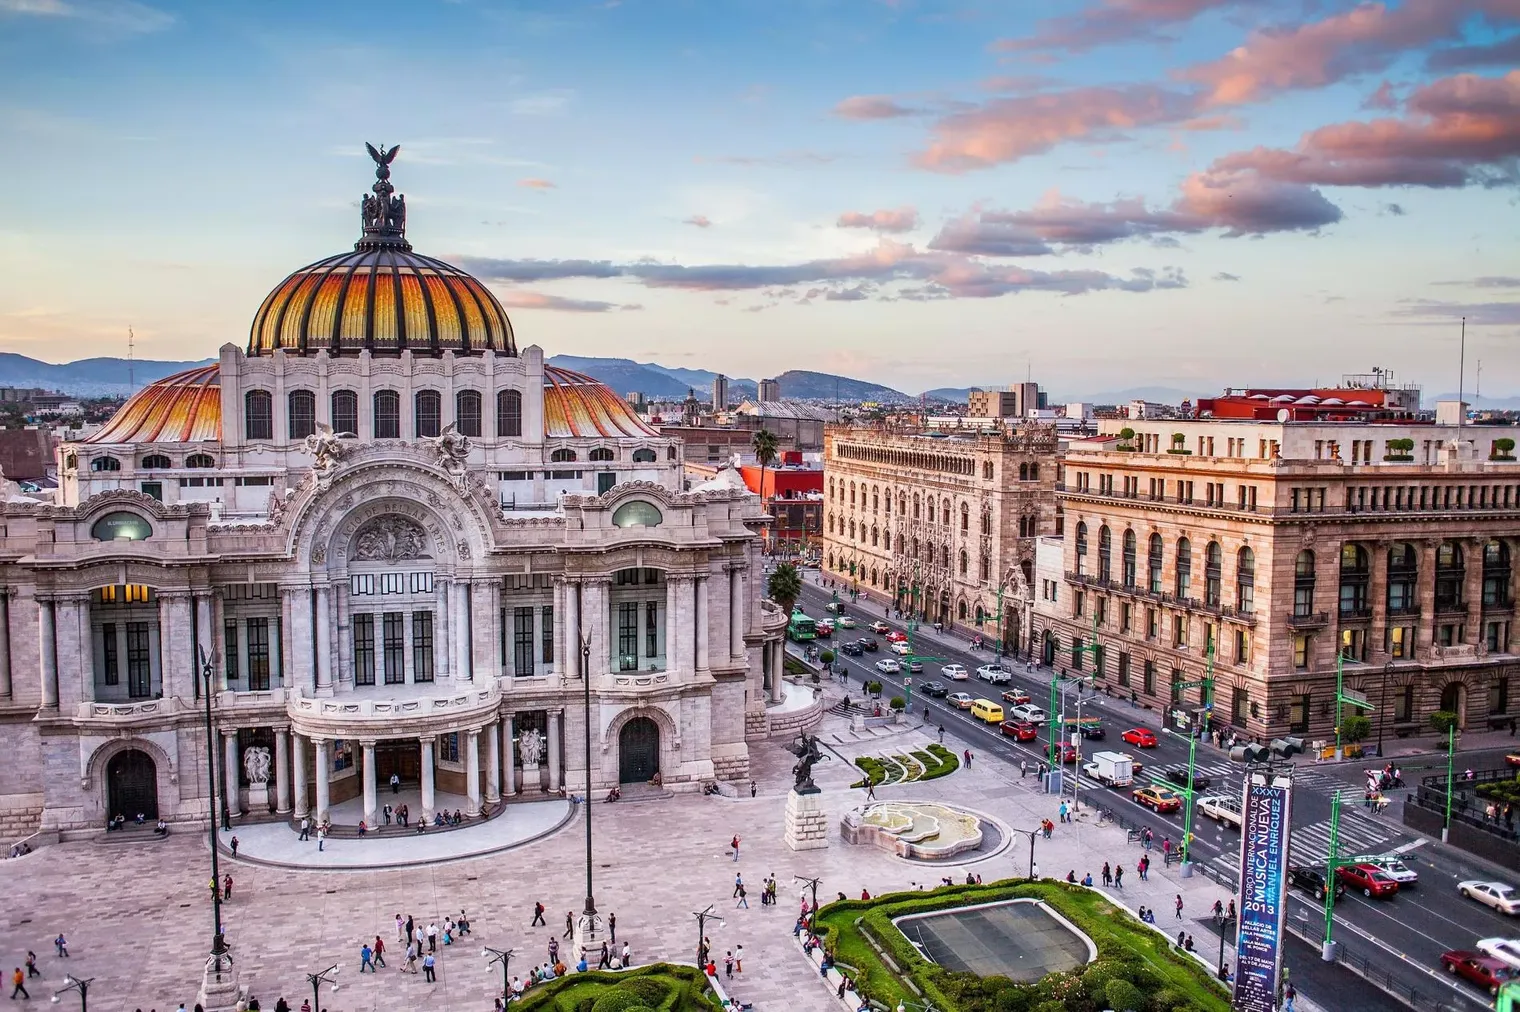 Mexico City | State of Mexico Region, Mexico - Rated 7.3